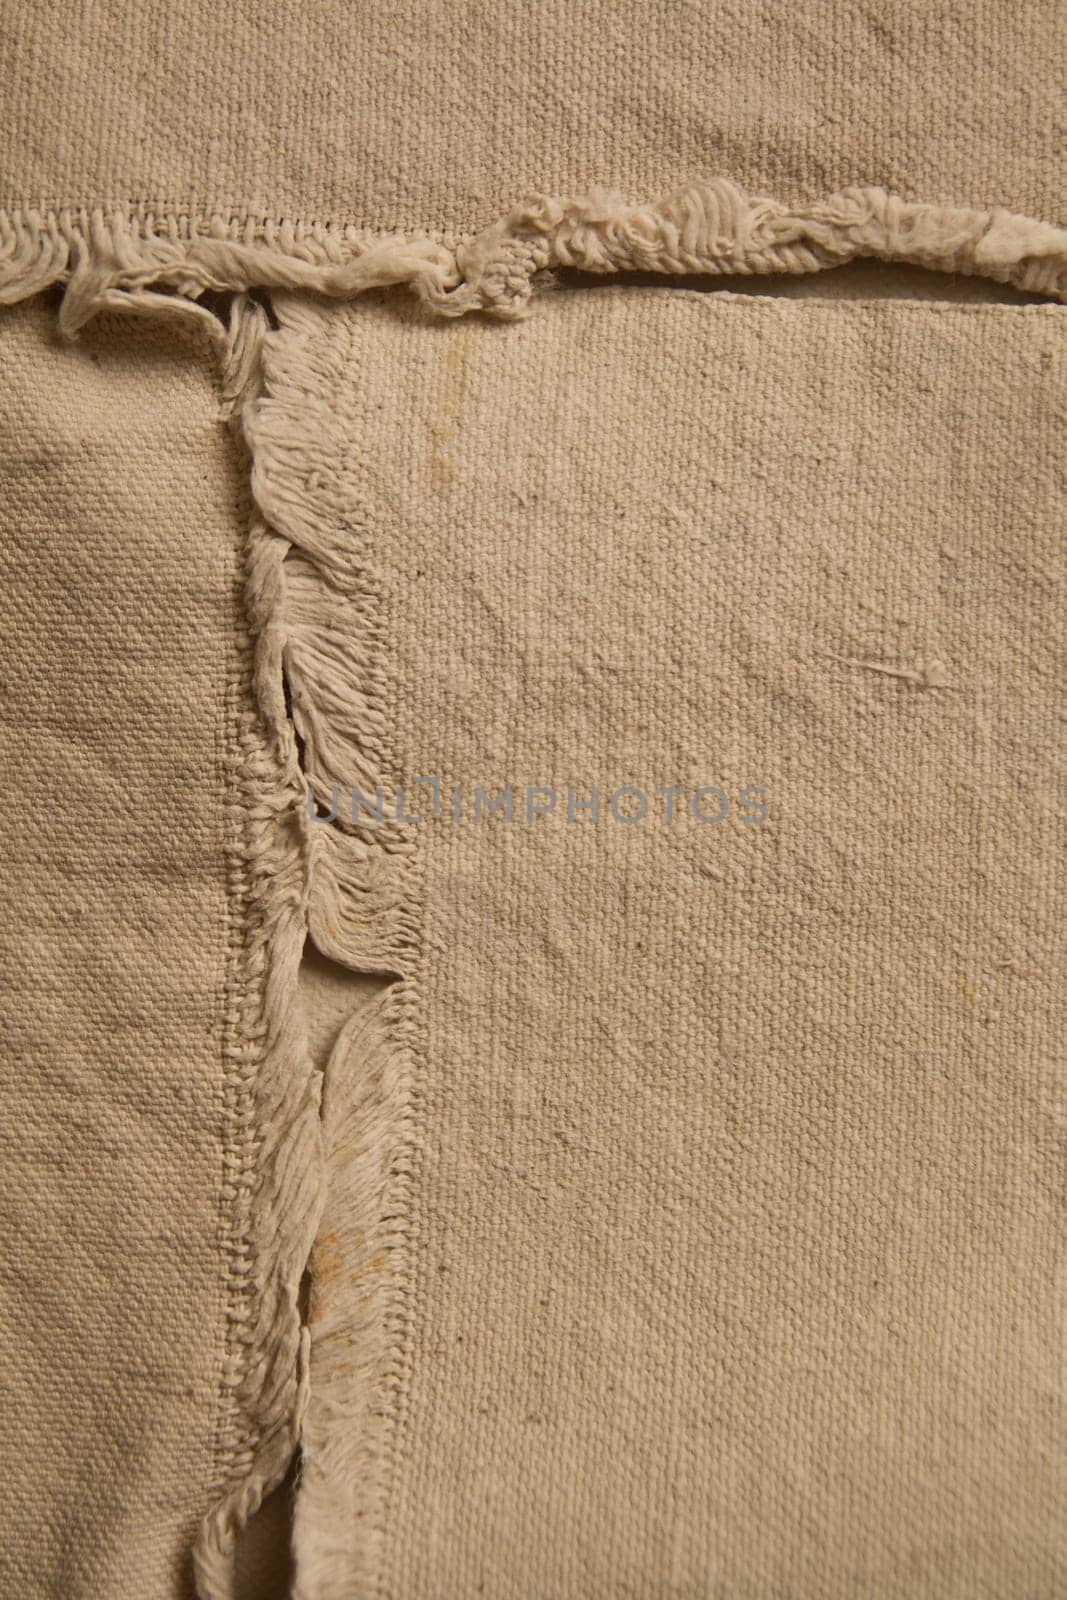 Close-Up of Beige Textured Fabric with Frayed Seam Detail by njproductions